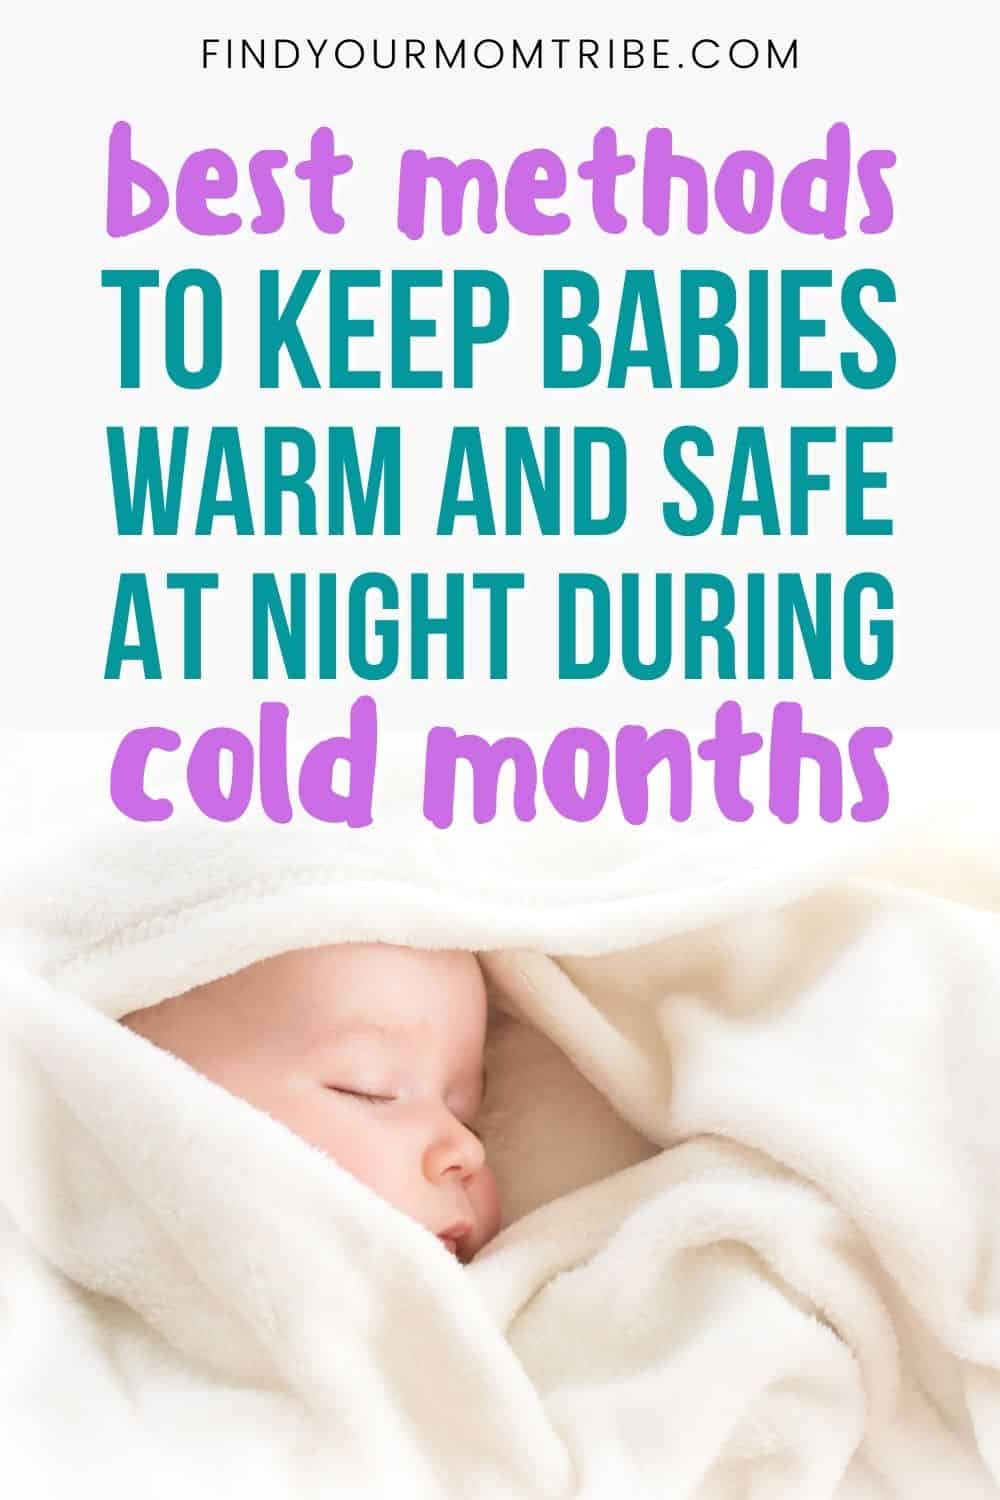 How To Keep Baby Warm At Night During Cold Months Pinterest